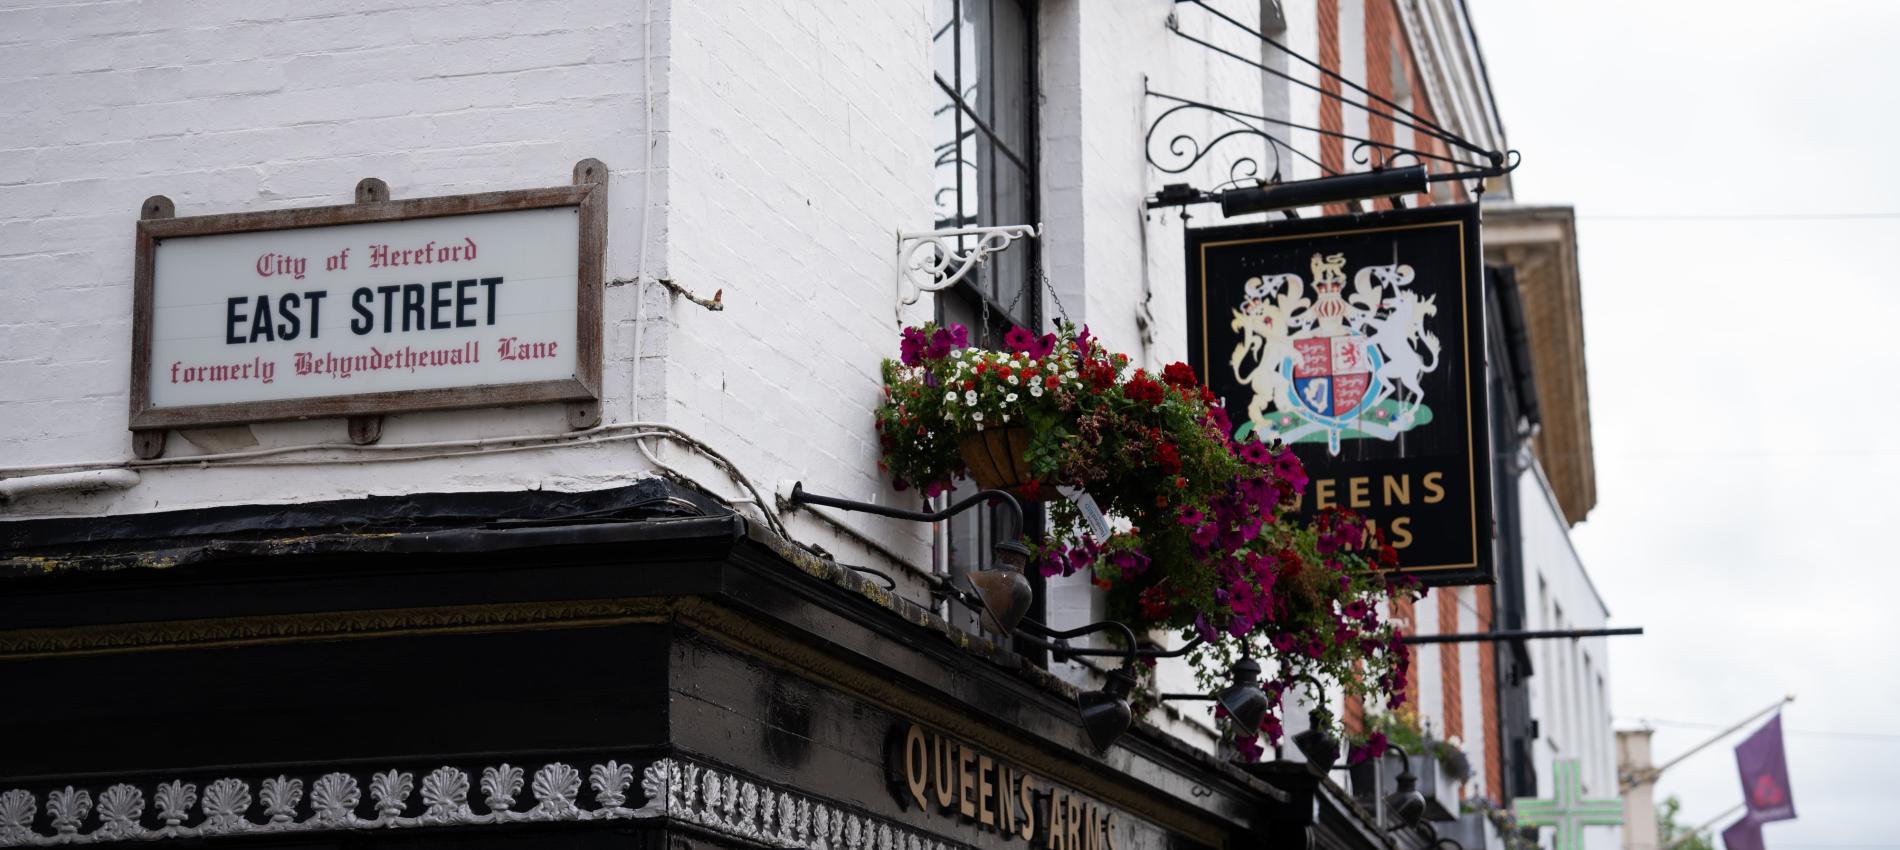 The Queen's Arms Pub in Hereford